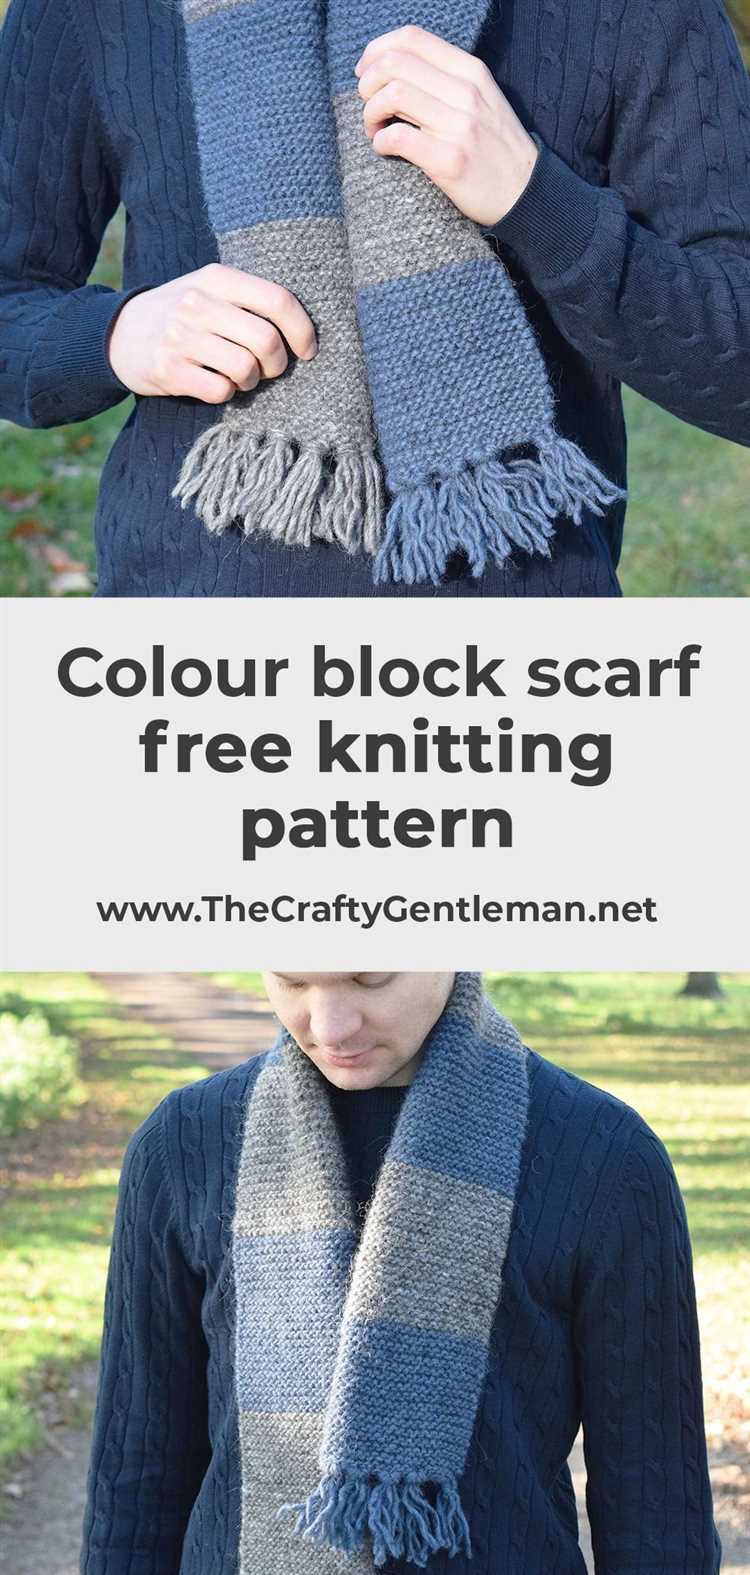 Knitting a Men’s Scarf: Step-by-Step Guide and Tips